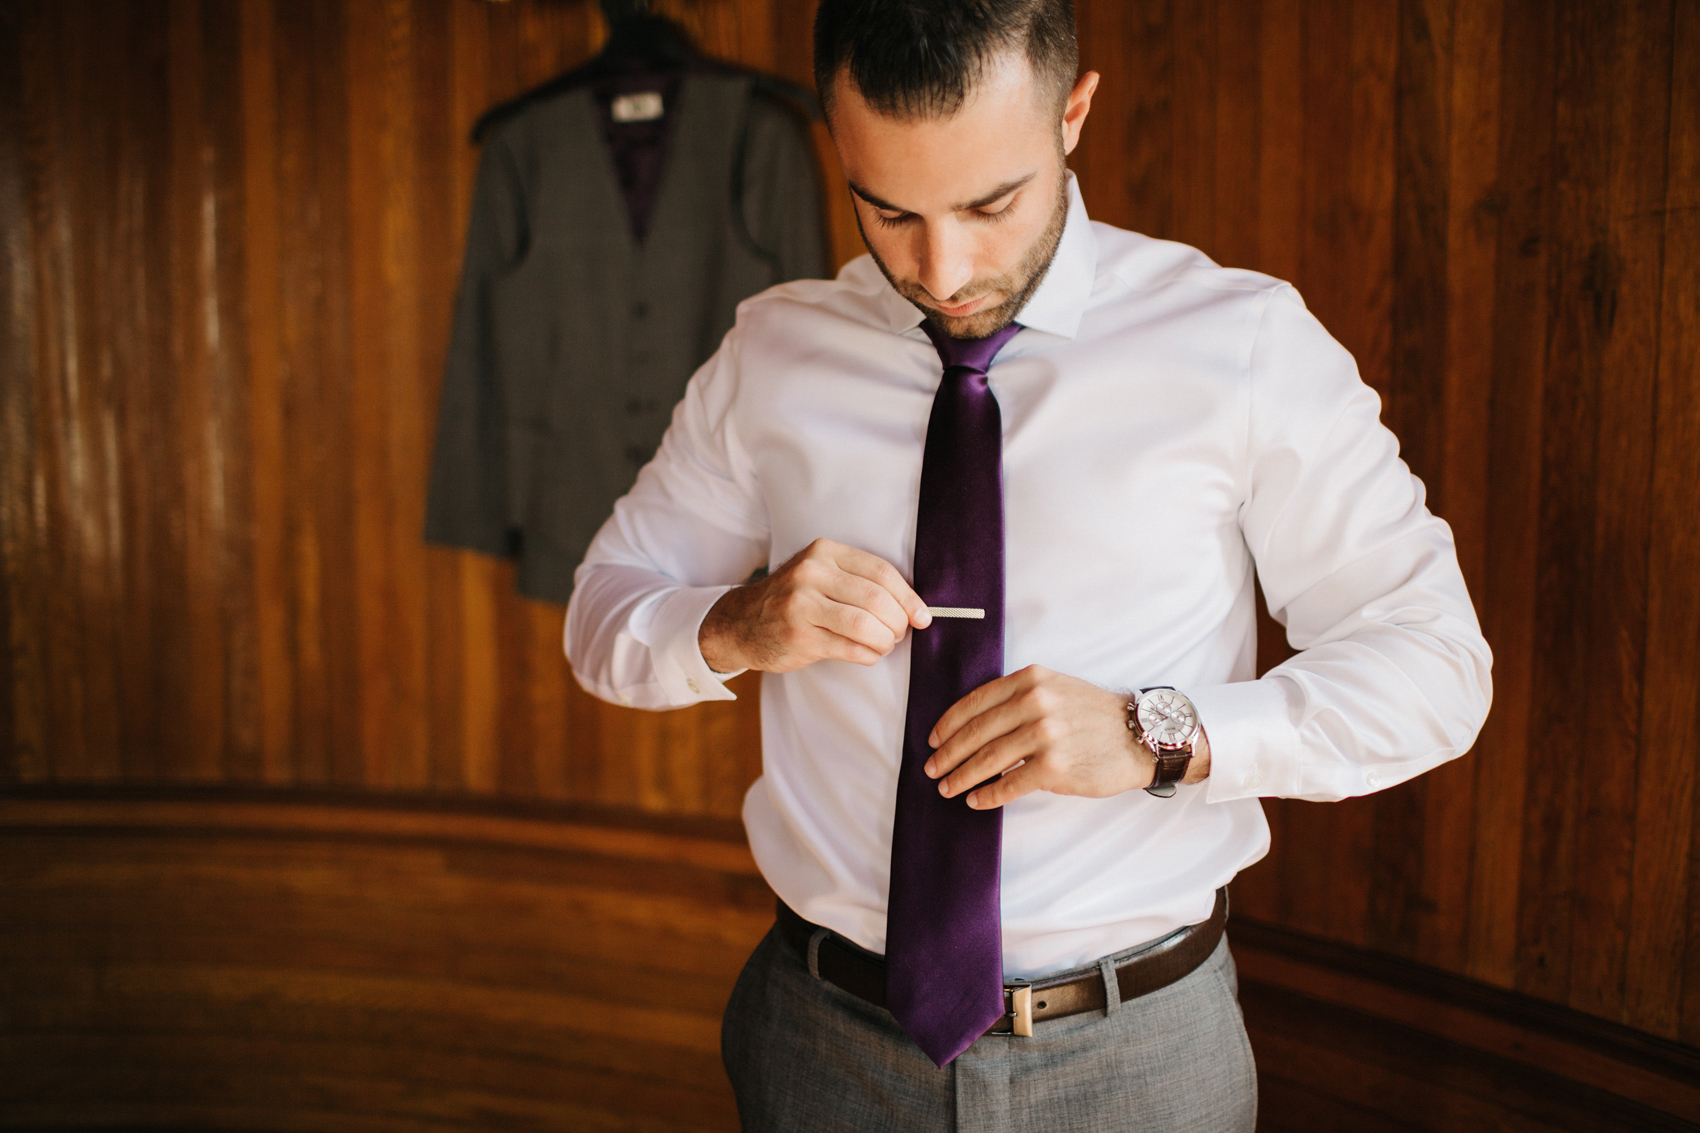 Groom wearing a purple tie and custom grey suit from Men's Warehouse